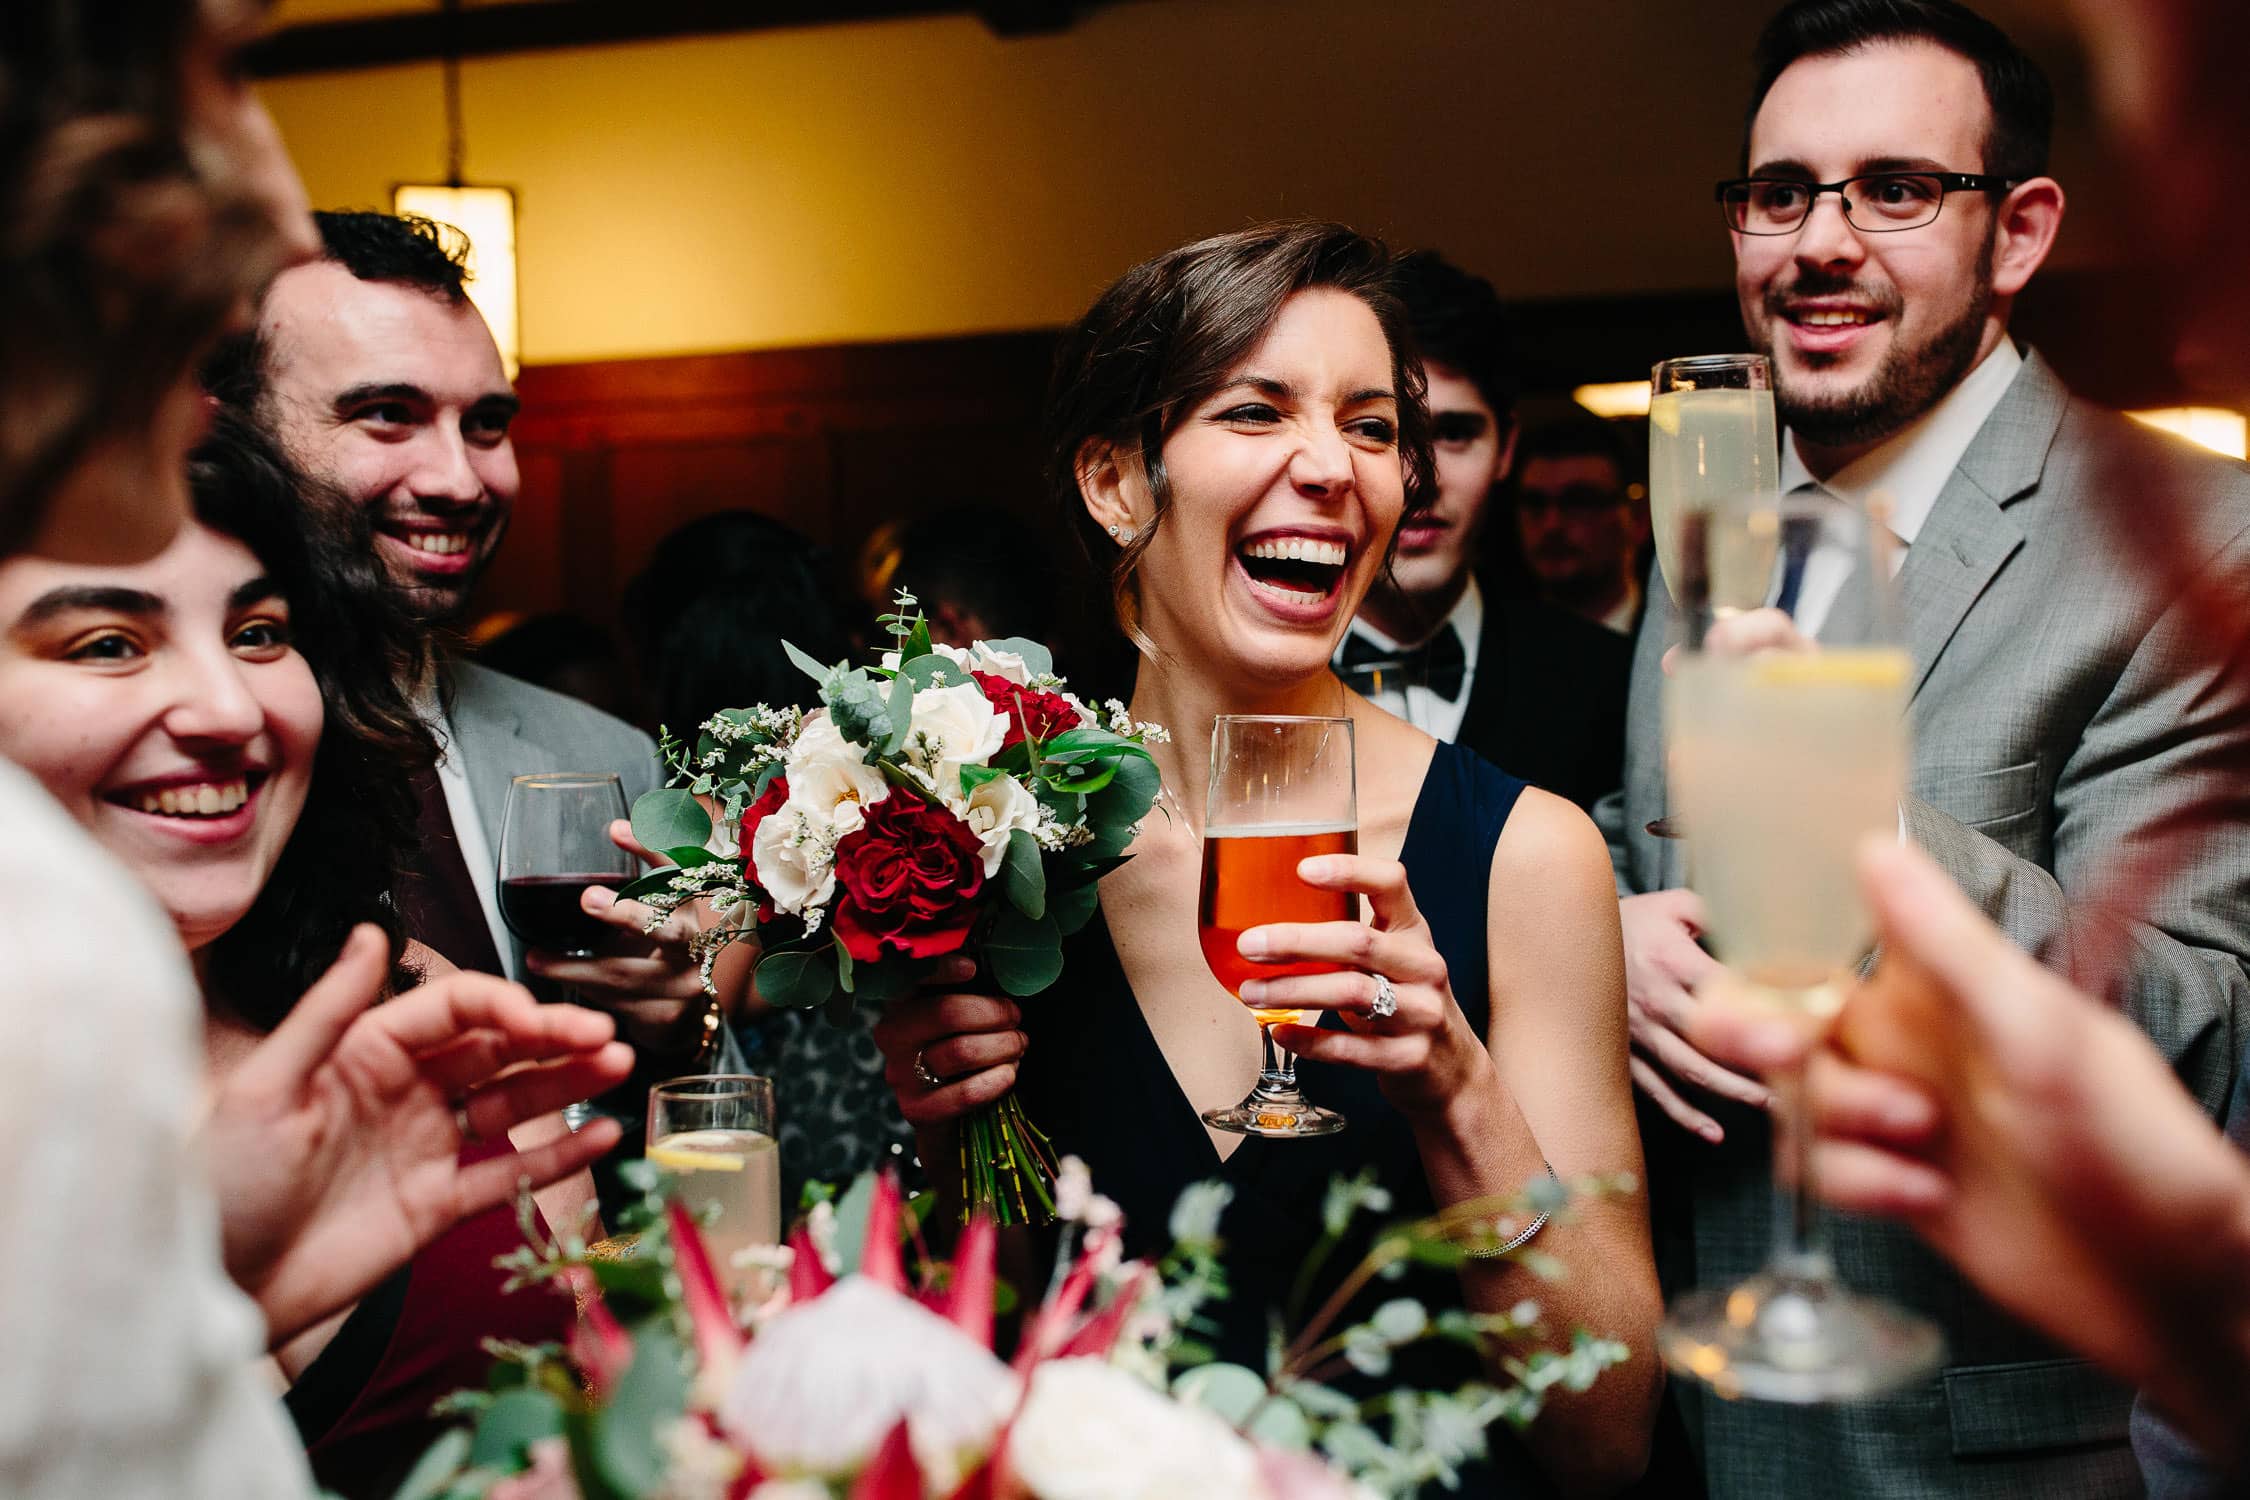 wedding party laughing with drinks in hand during toast